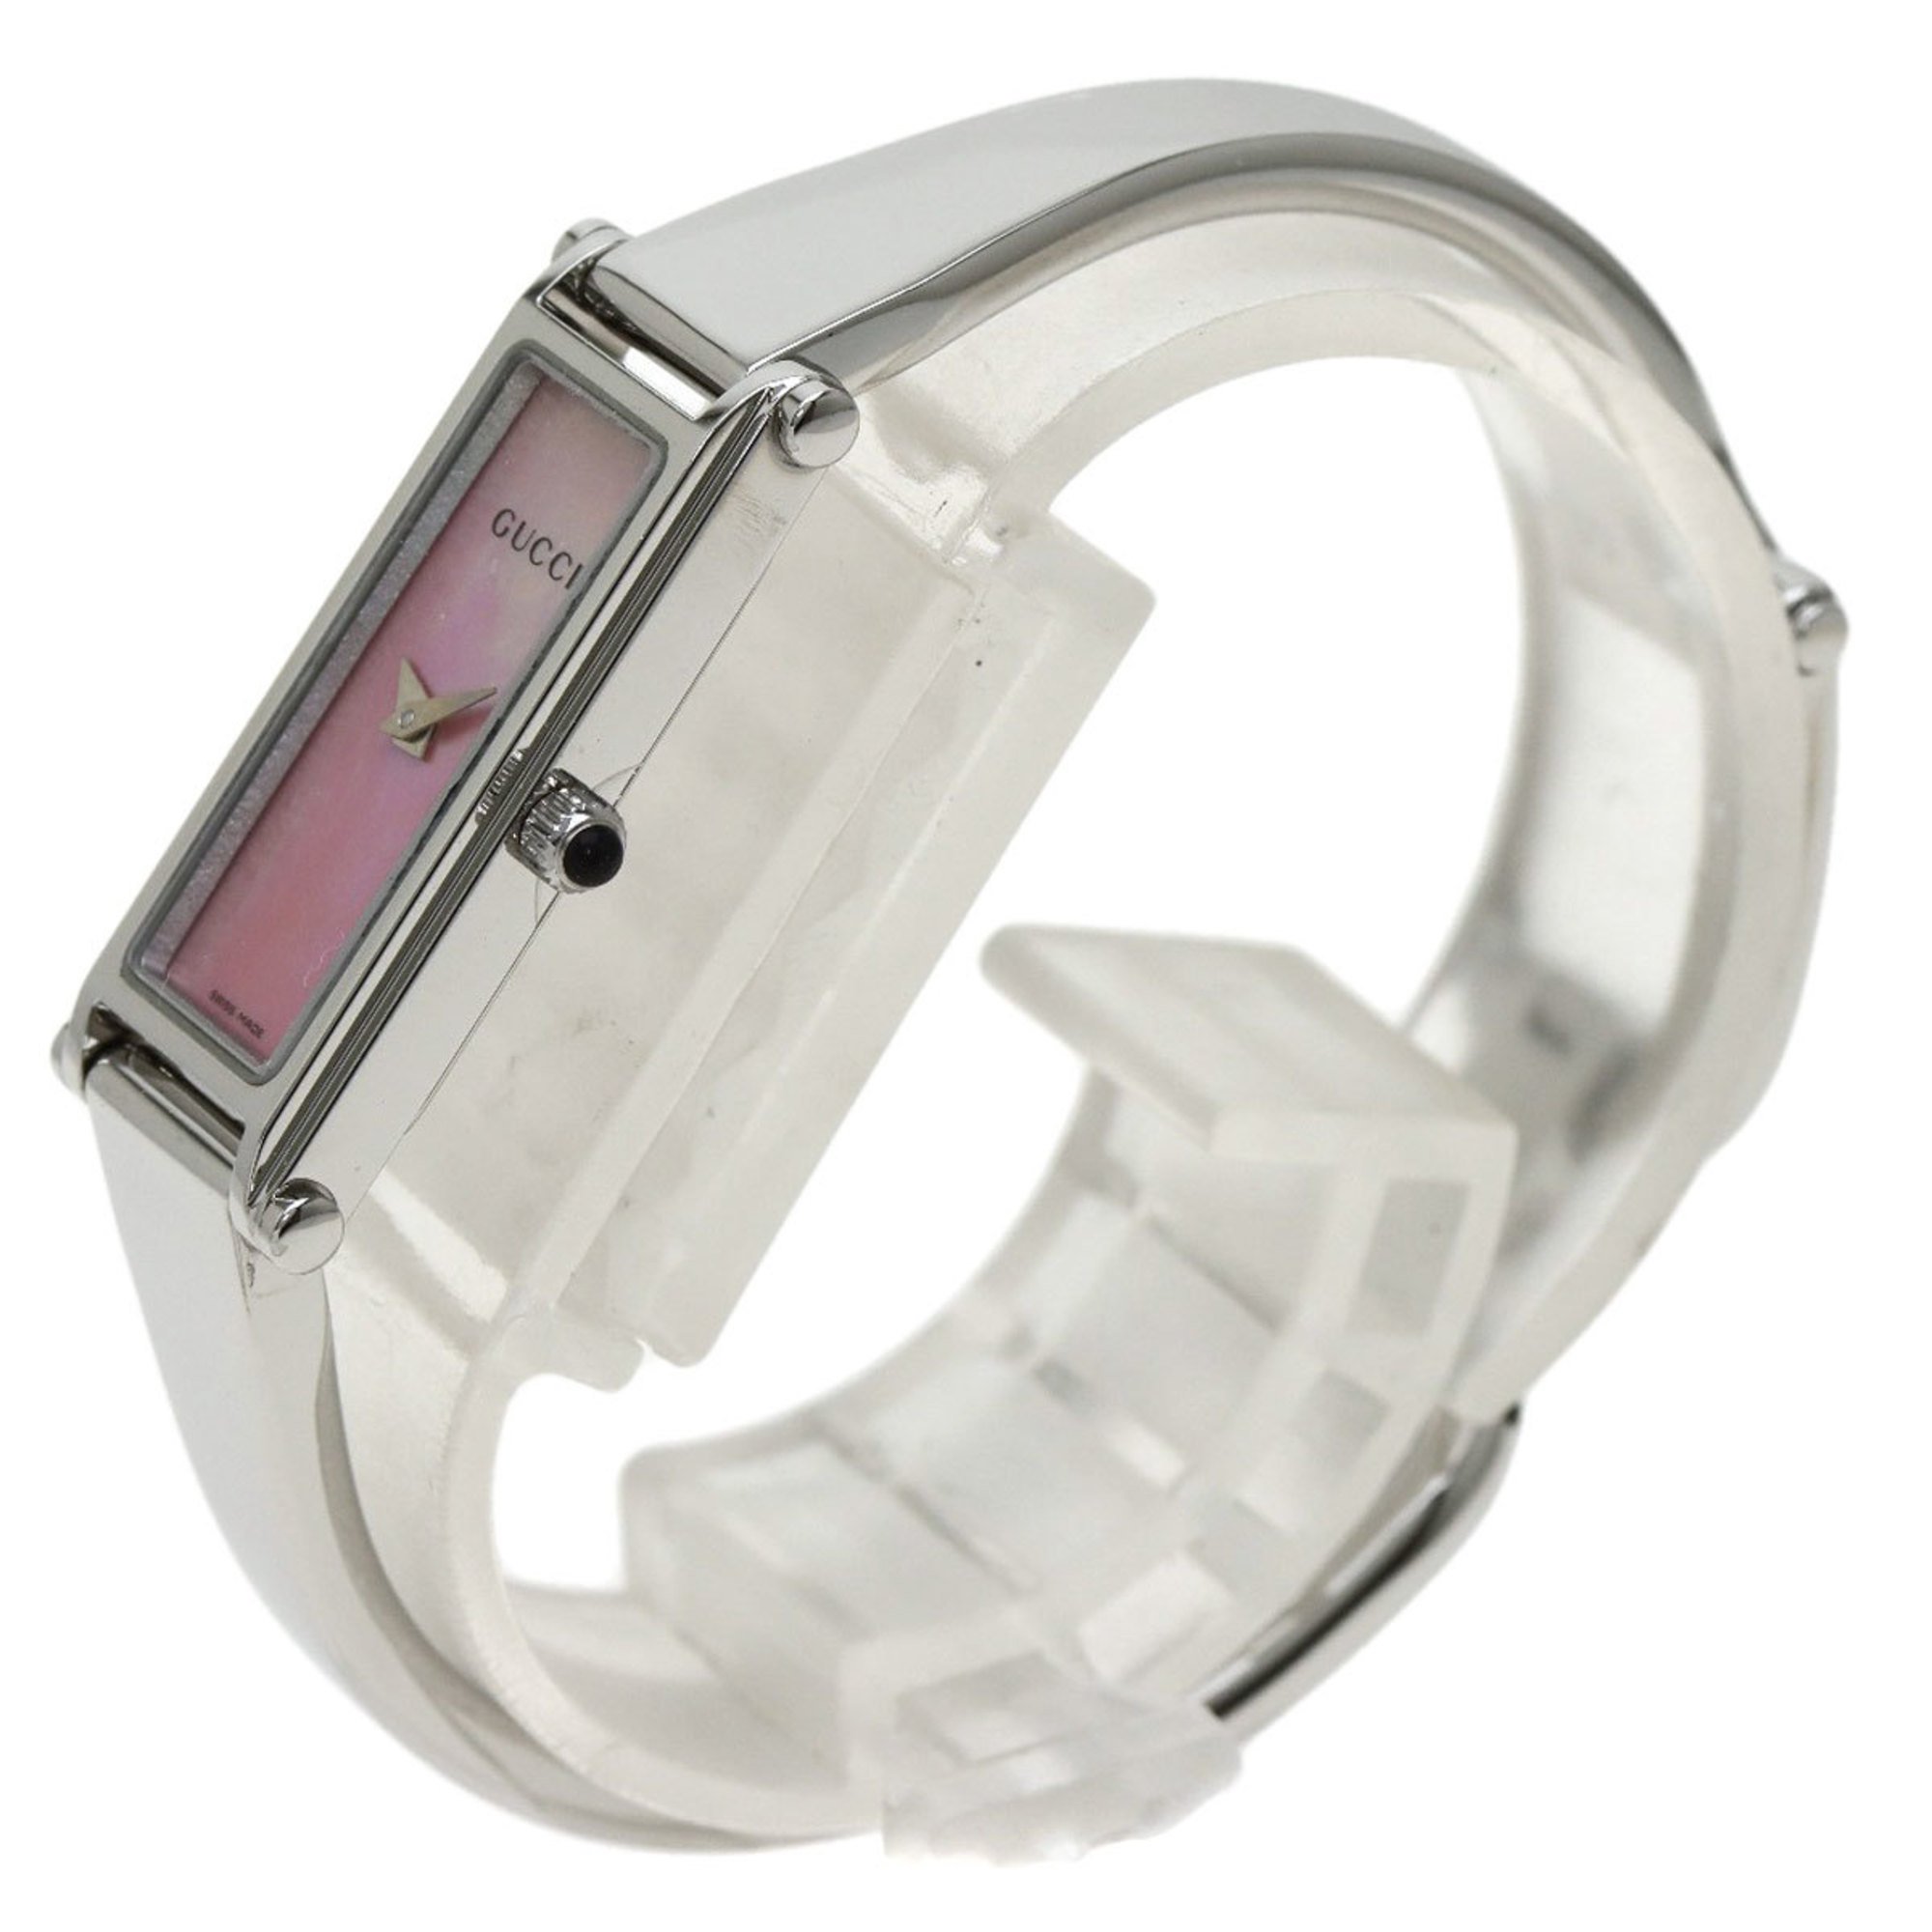 Gucci 1500L Bangle Square Face Watch Stainless Steel SS Ladies GUCCI